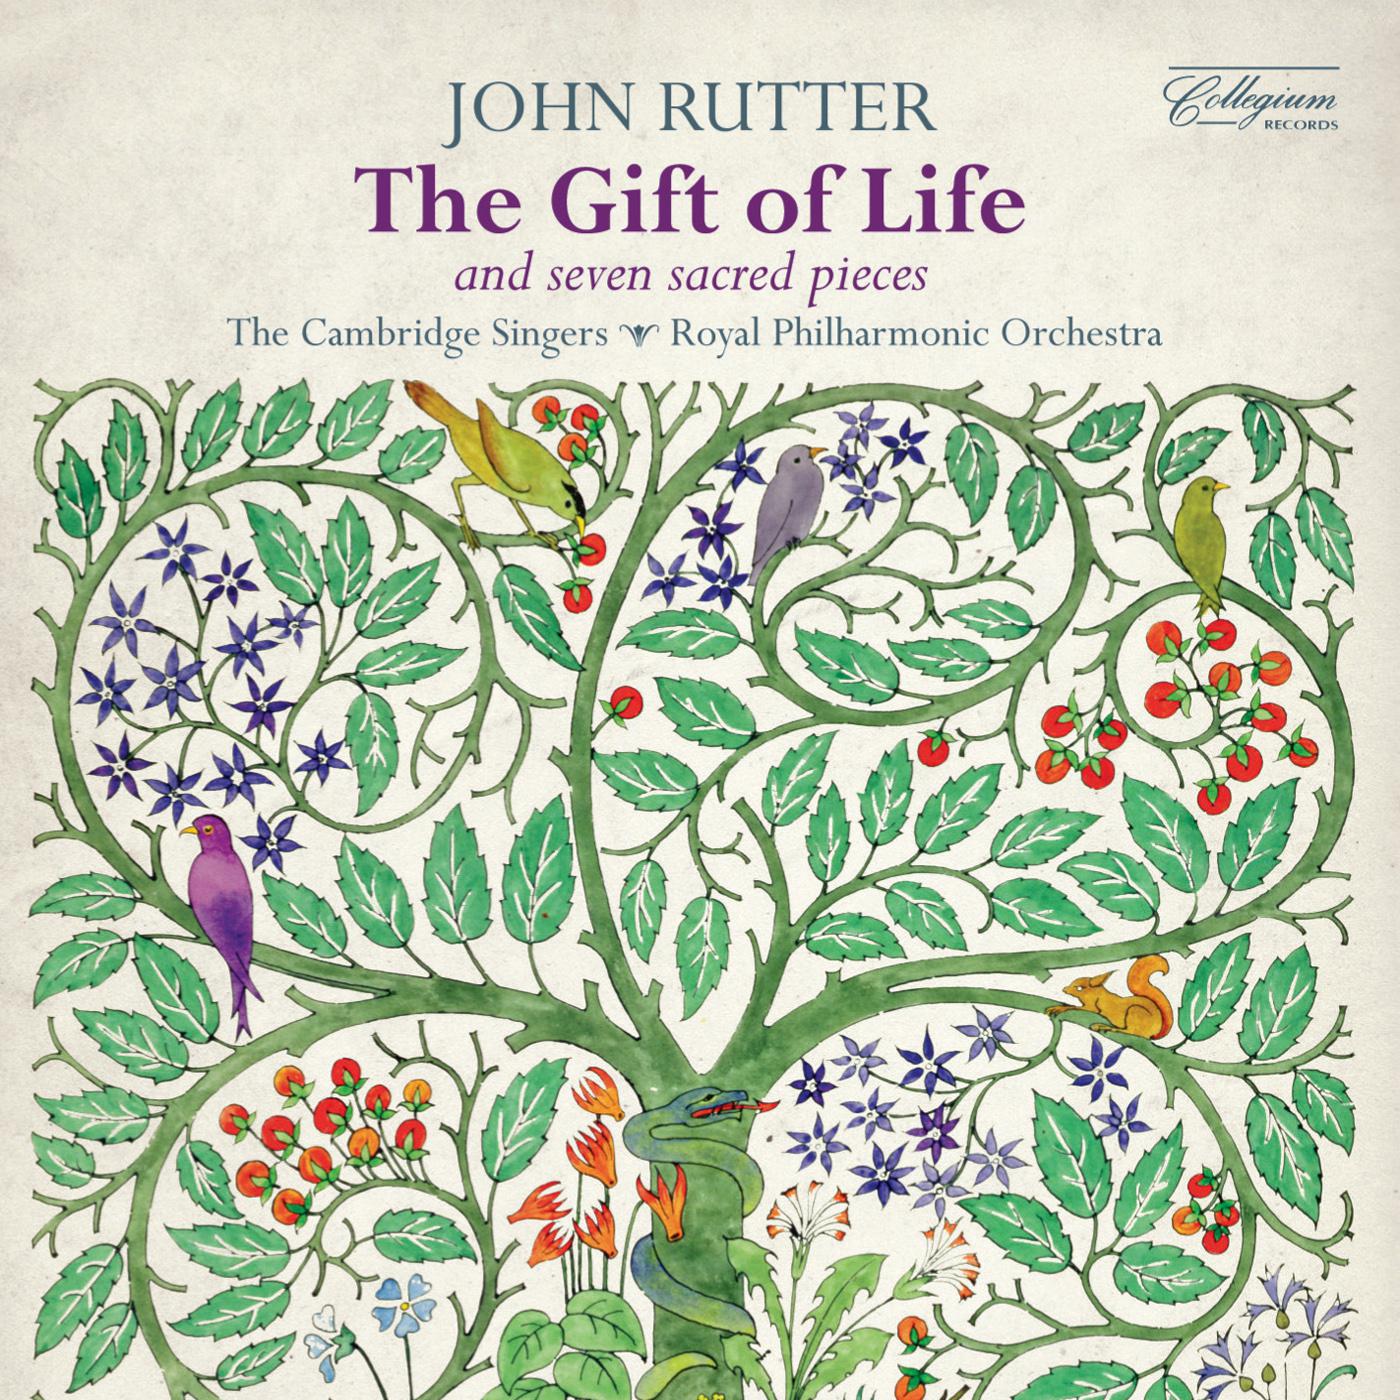 RUTTER, J.: Choral Music (The Gift of Life and 7 Sacred Pieces) (Cambridge Singers, Royal Philharmonic, Rutter)